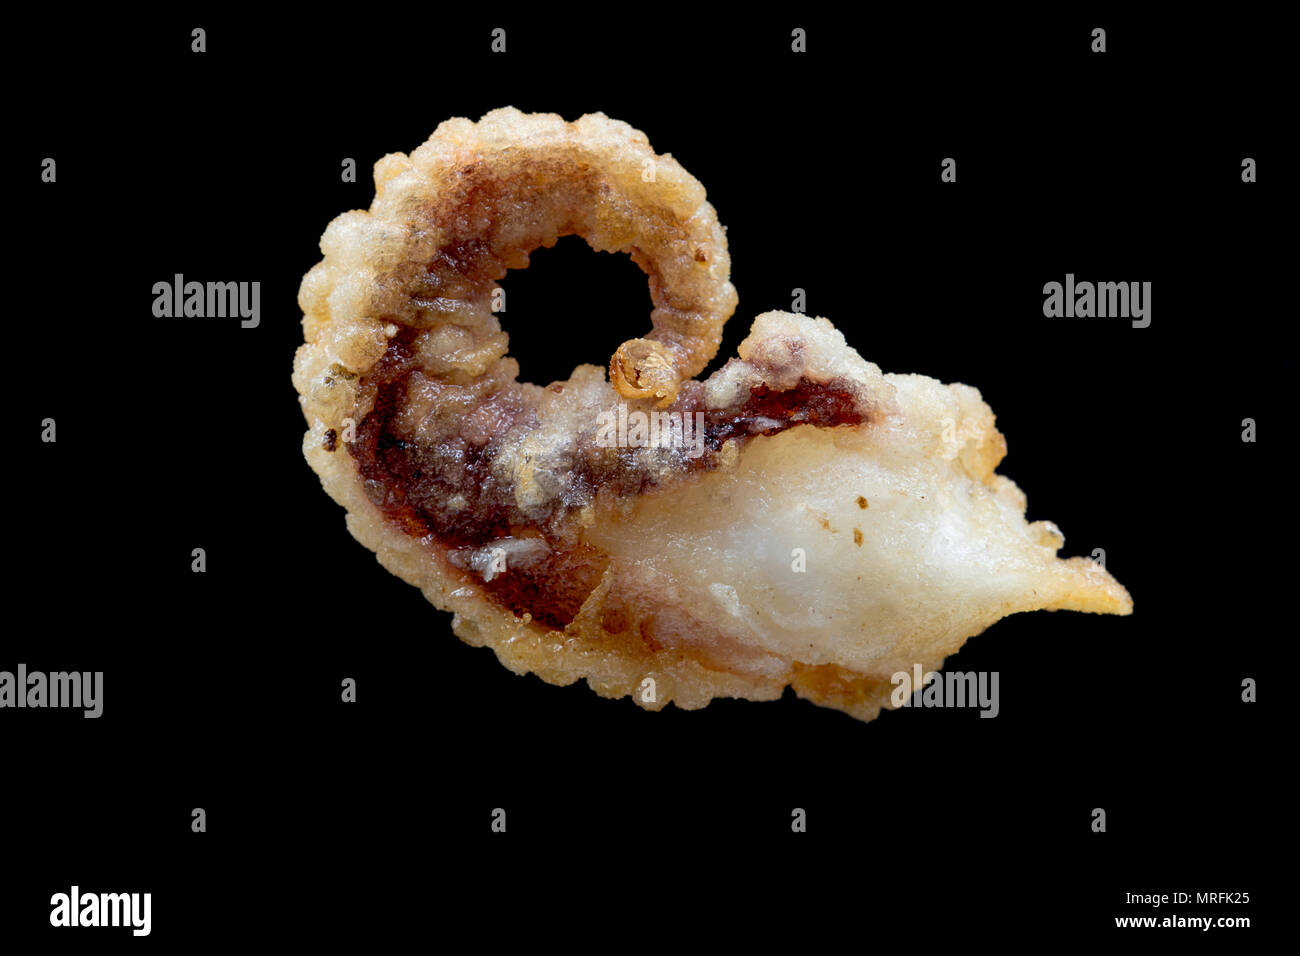 The floured and deep fried tentacle of a cuttlefish, Sepia officinalis, that has been caught in the English Channel, Dorset England UK. Cuttlefish coa Stock Photo